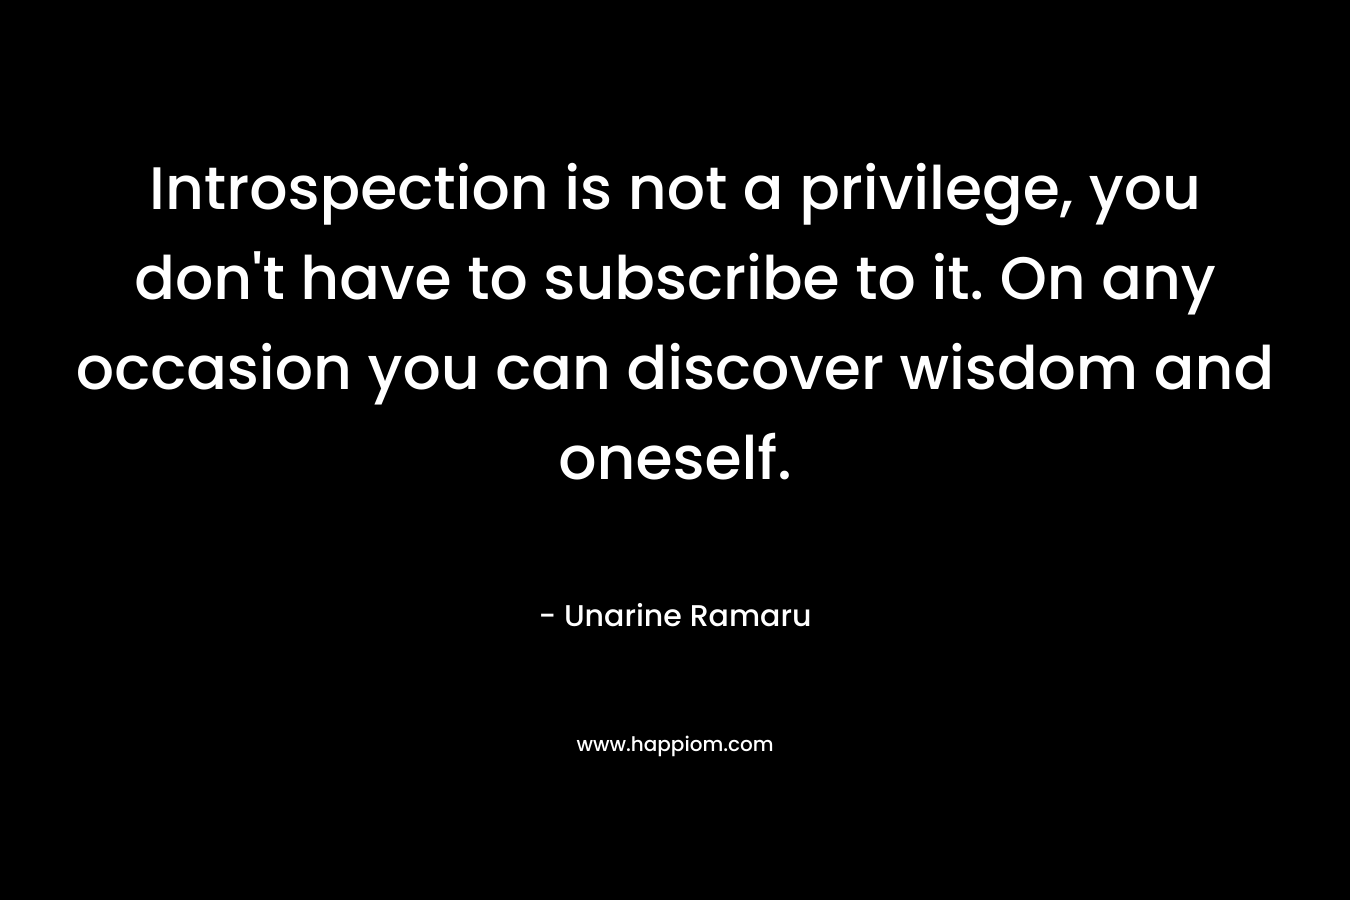 Introspection is not a privilege, you don’t have to subscribe to it. On any occasion you can discover wisdom and oneself. – Unarine Ramaru